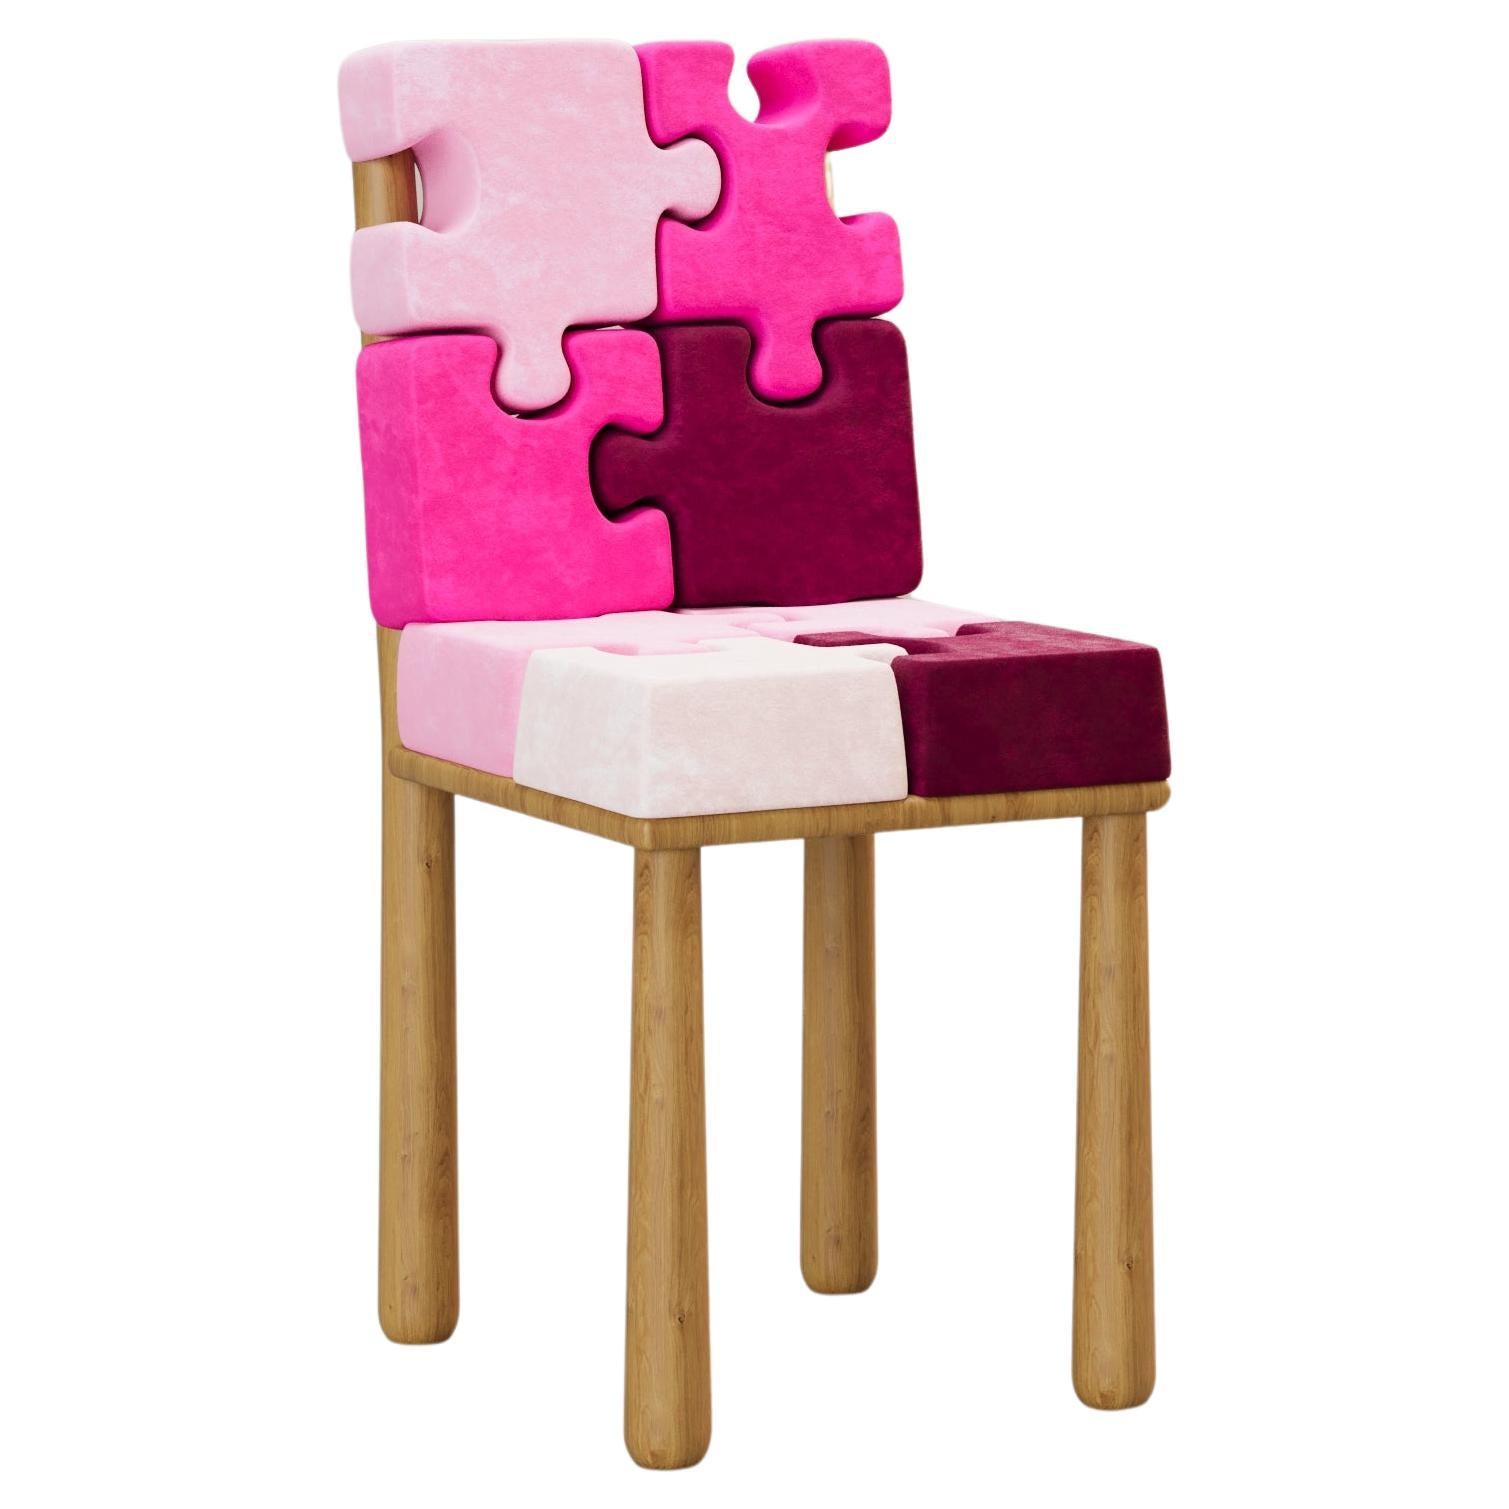 L'INSOLENTE Velvet Chair in Pink by Alexandre Ligios, REP by Tuleste Factory For Sale